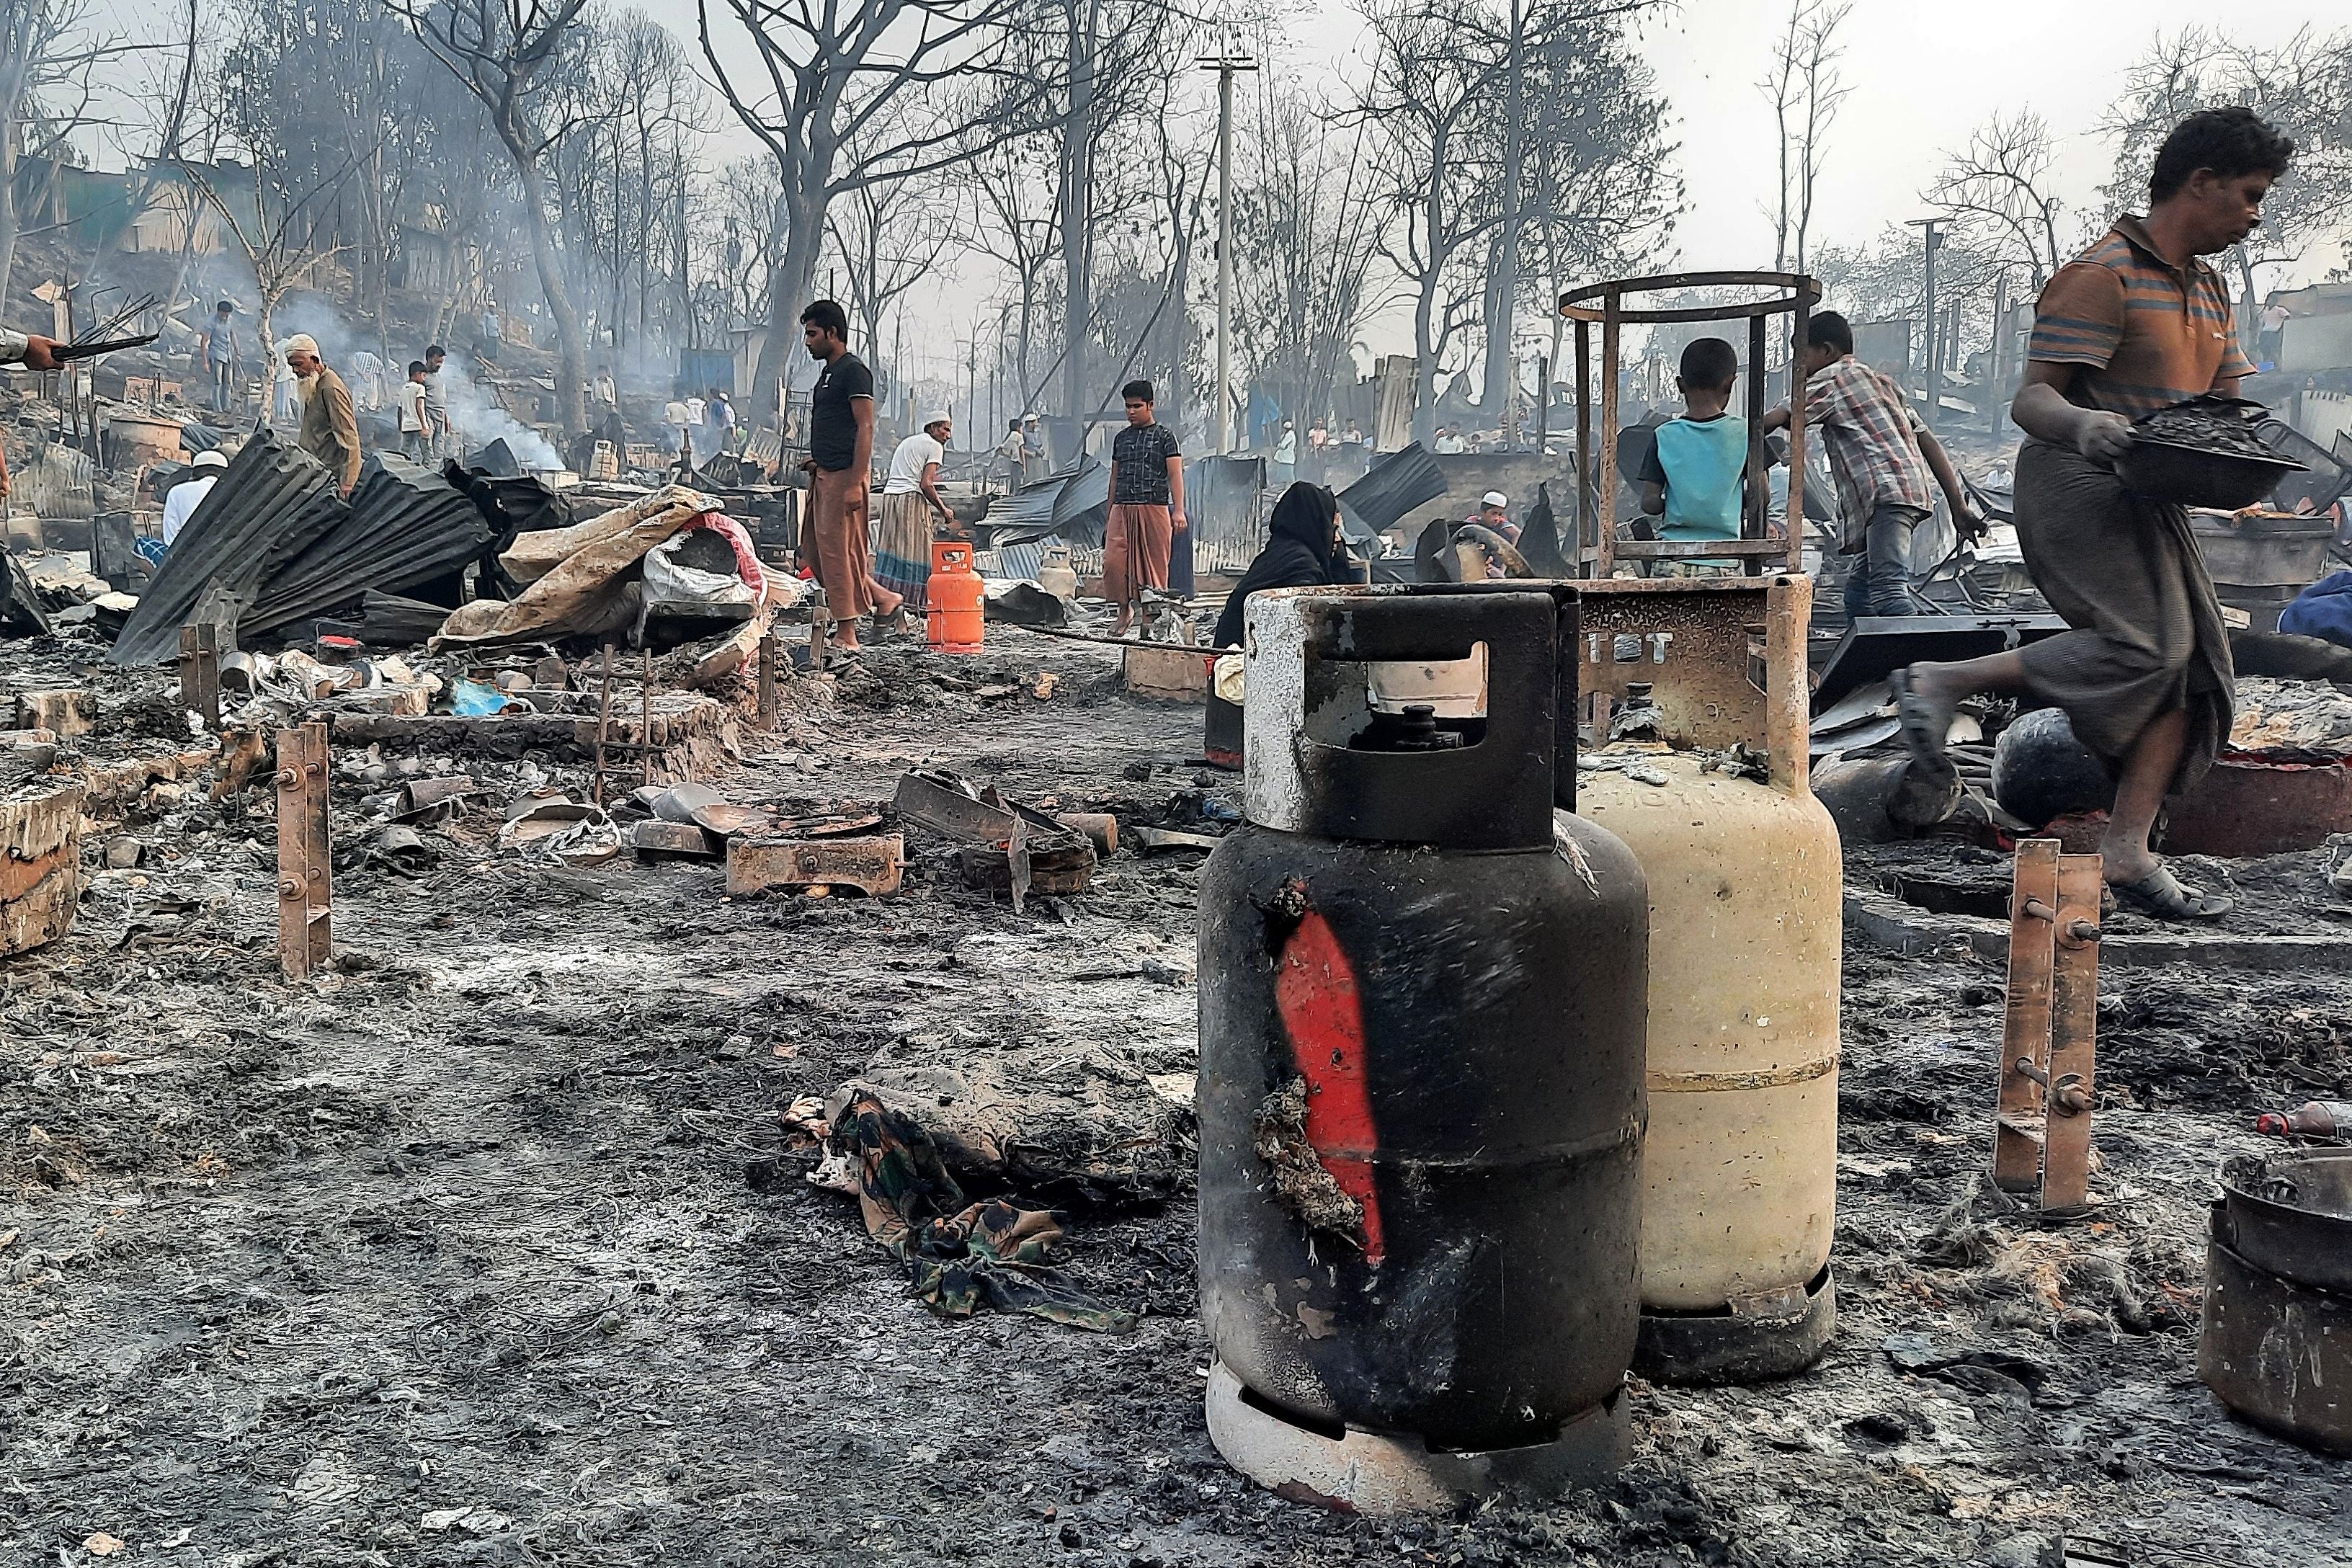 The fire swept through the world’s largest refugee settlement